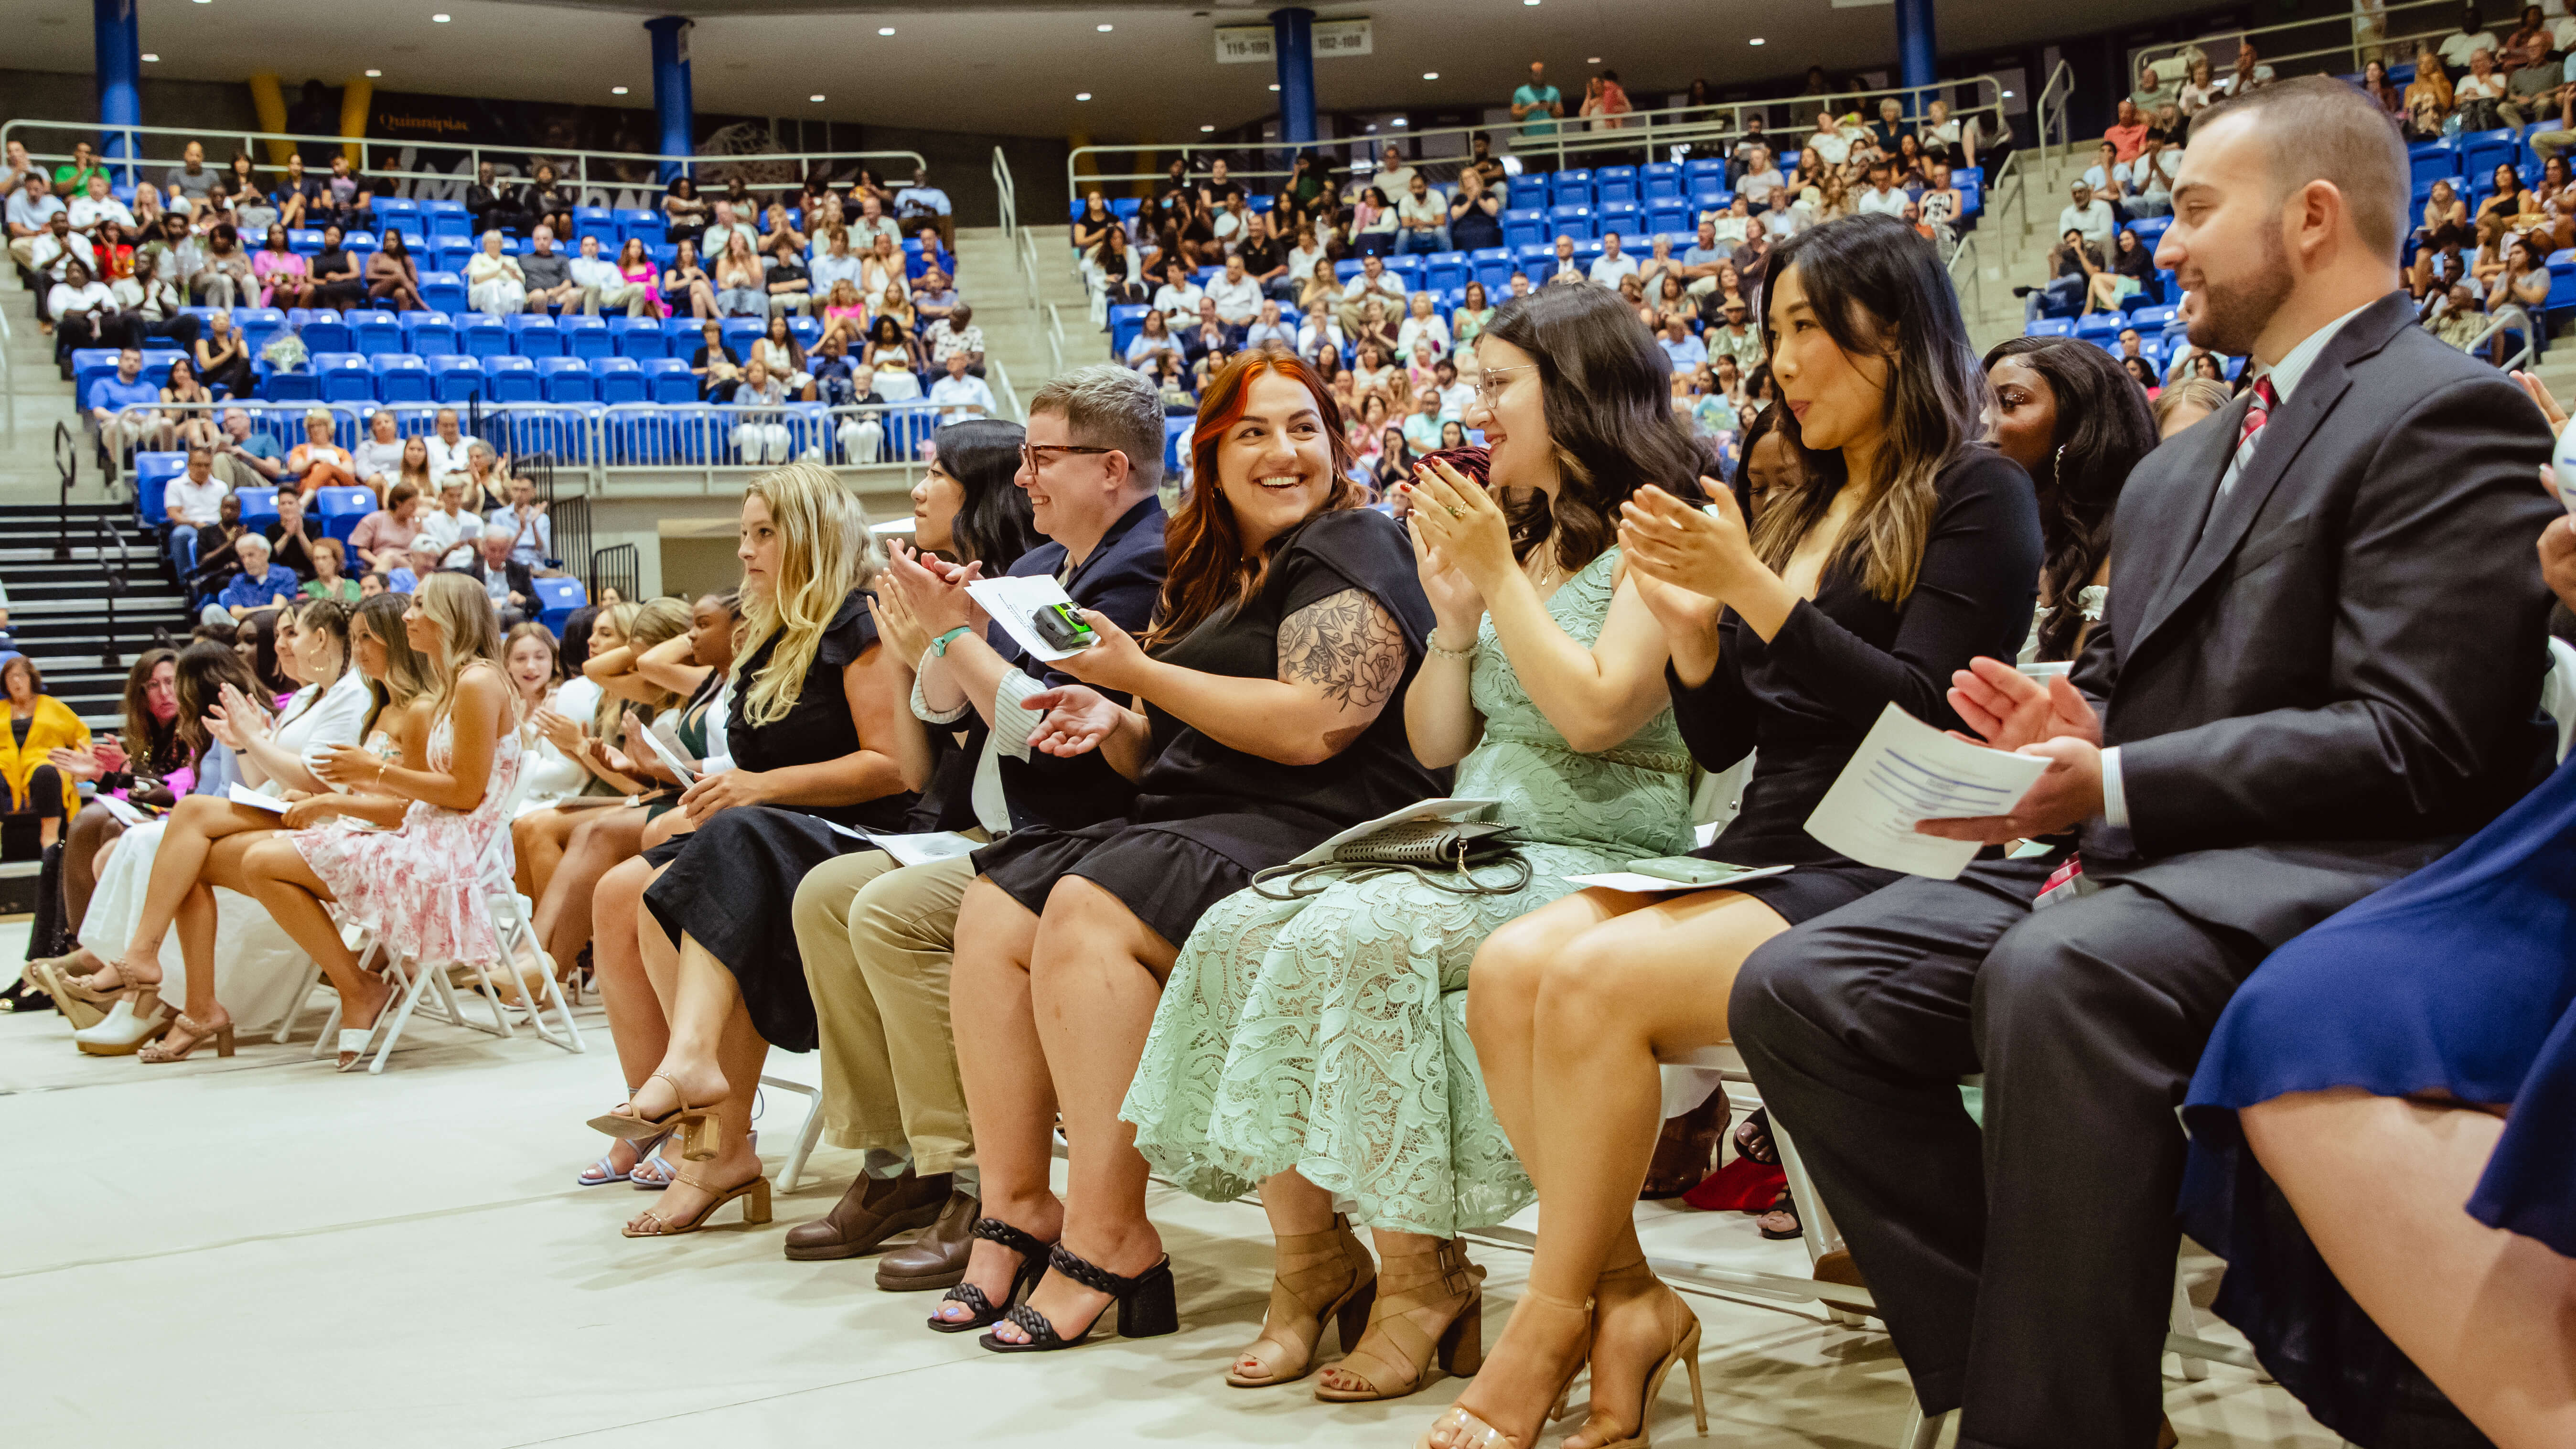 Graduates clap in their seats during the Pinning Ceremony